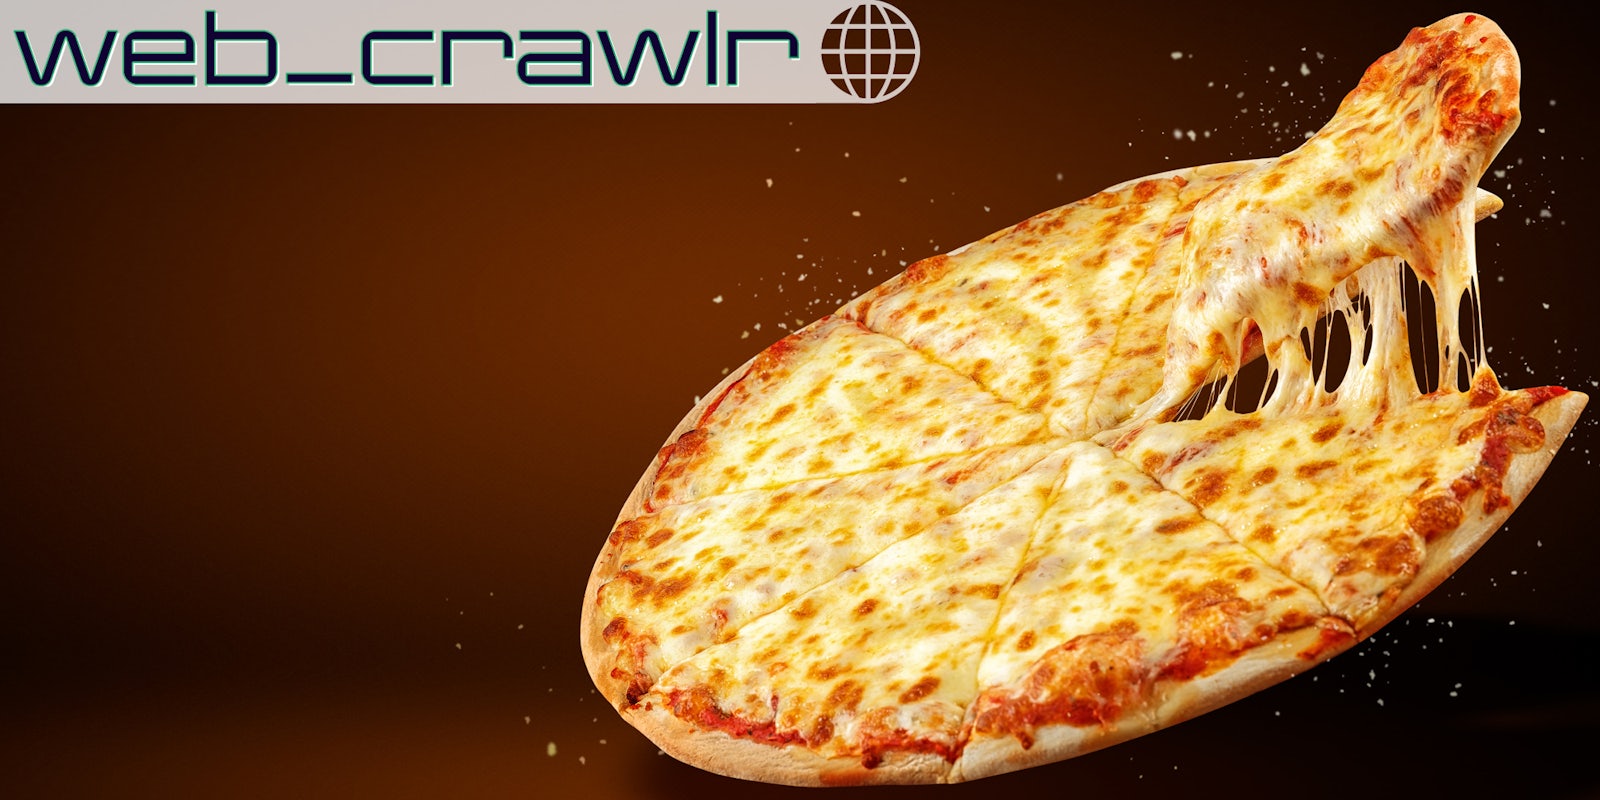 A pizza. The Daily Dot newsletter web_crawlr logo is in the top left corner.